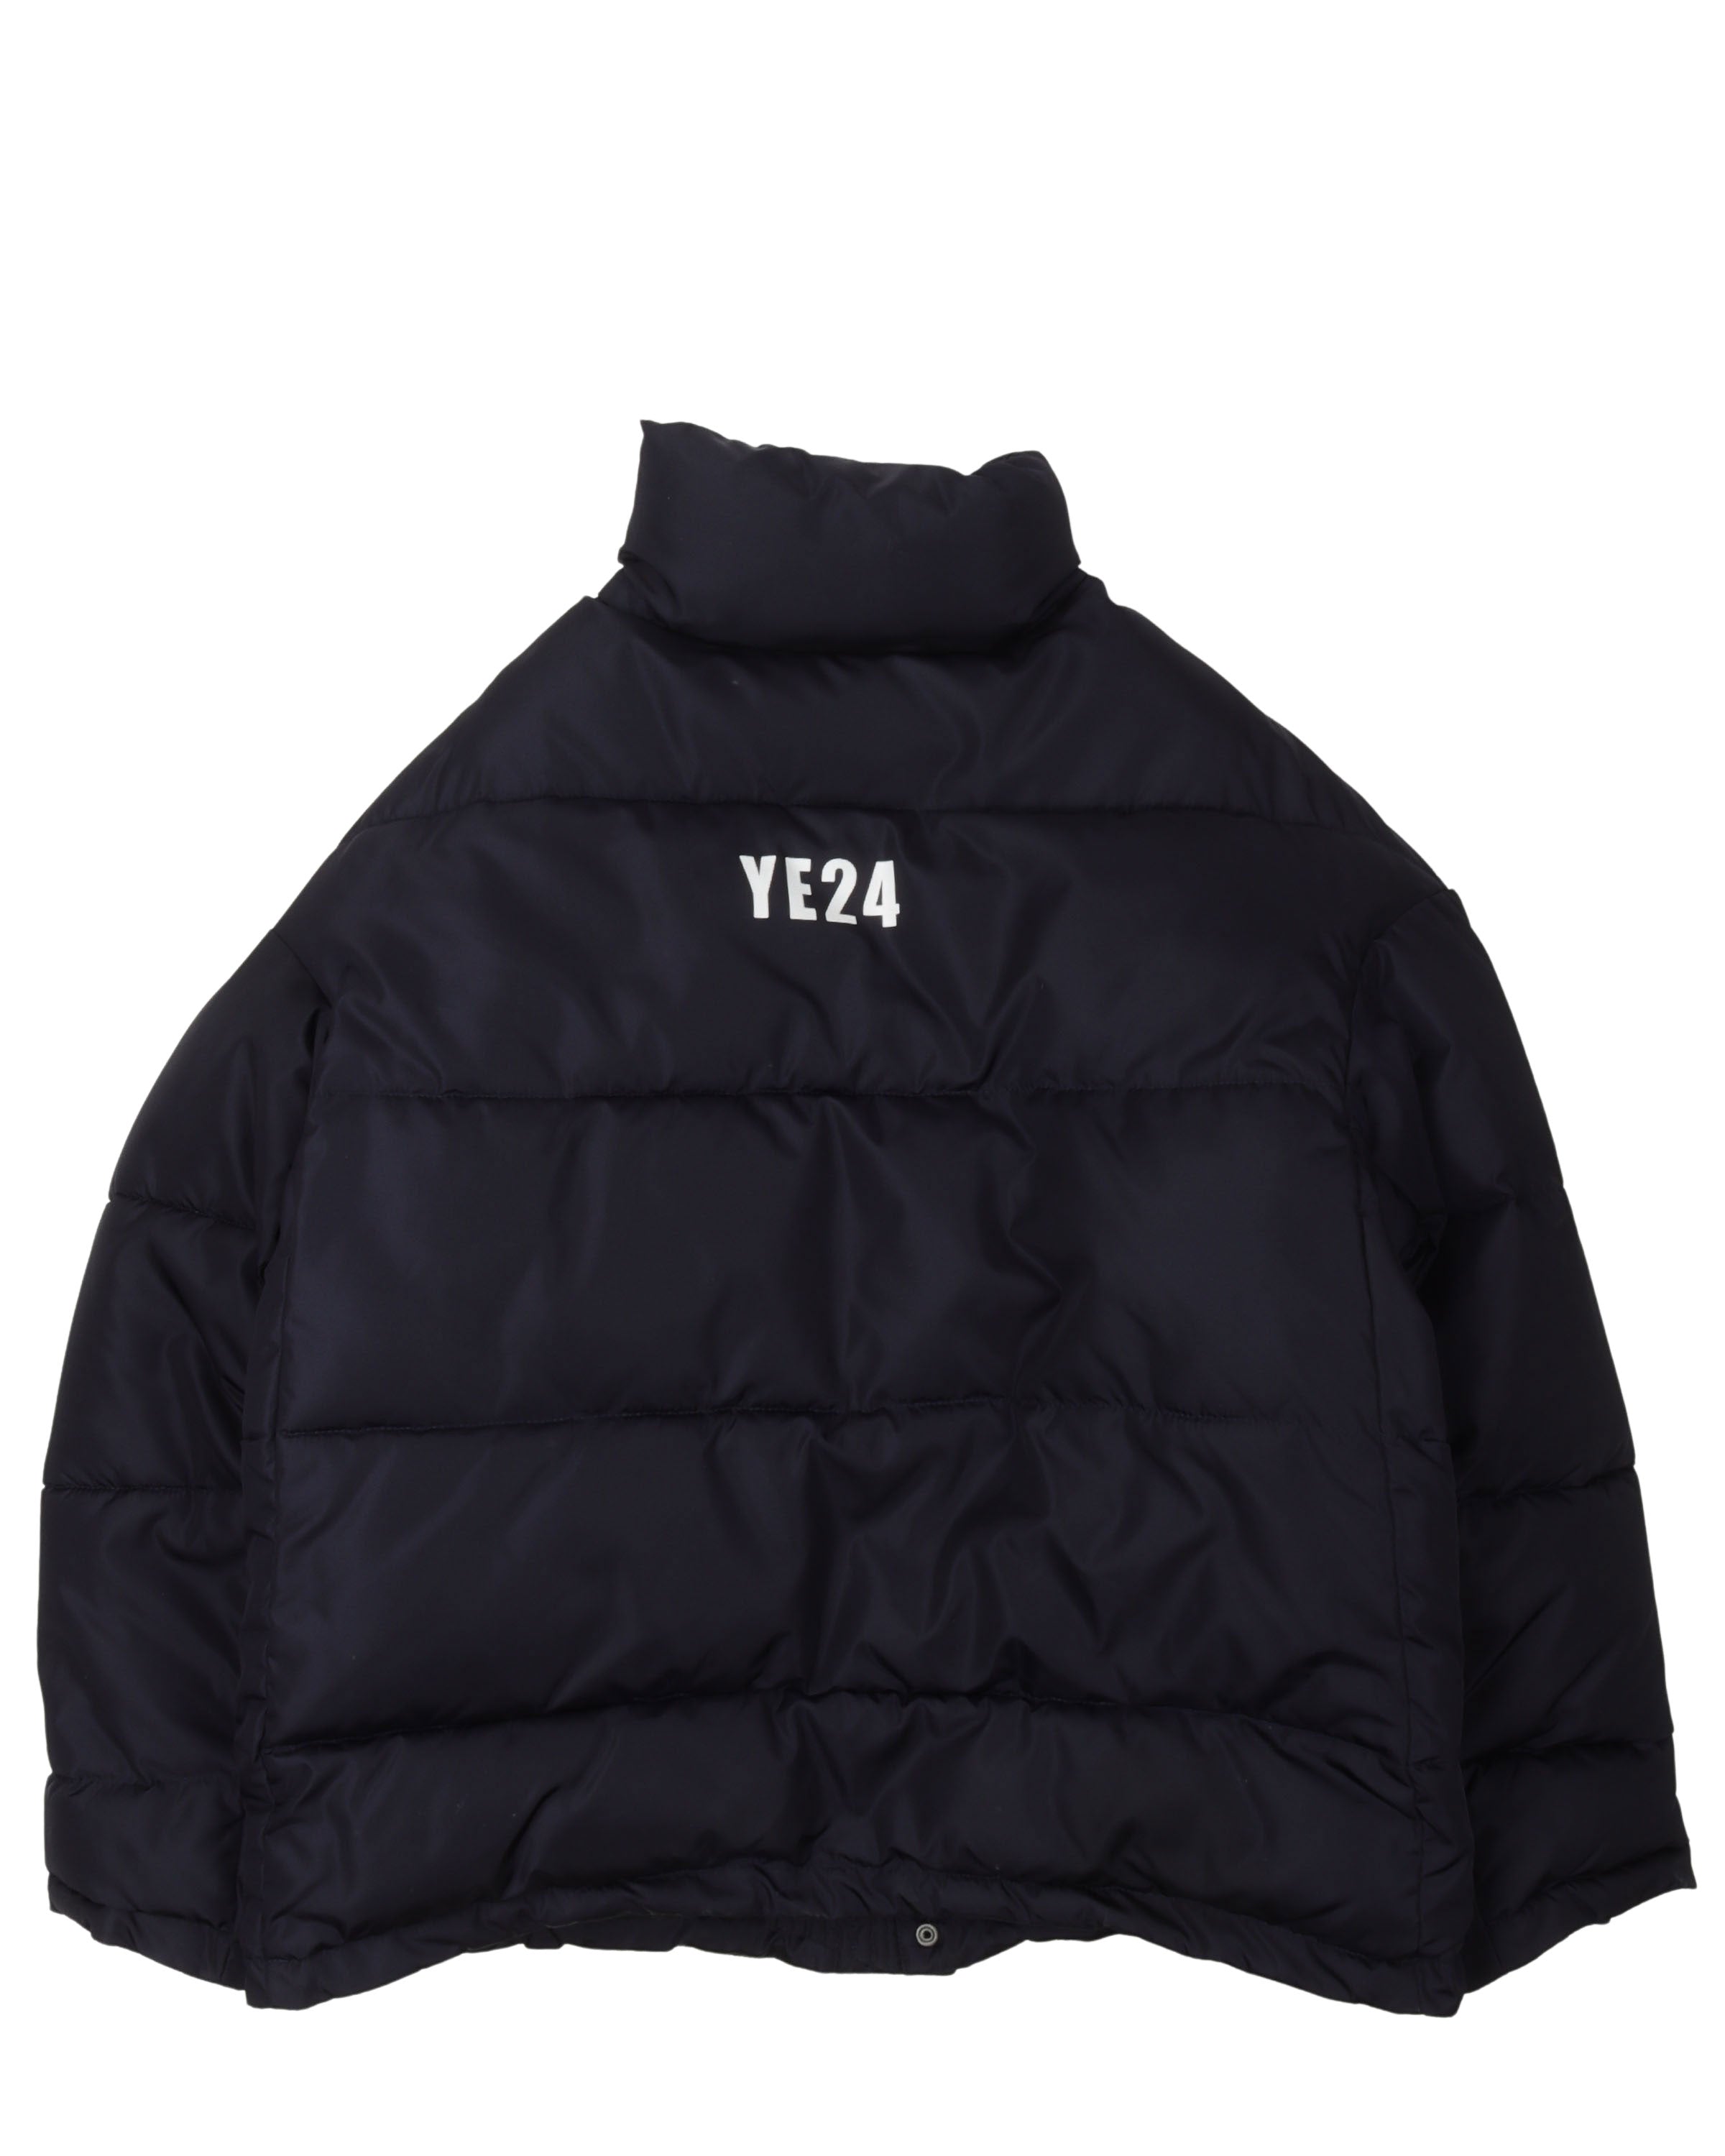 "YE24" Embroidered Swing Puffer Jacket